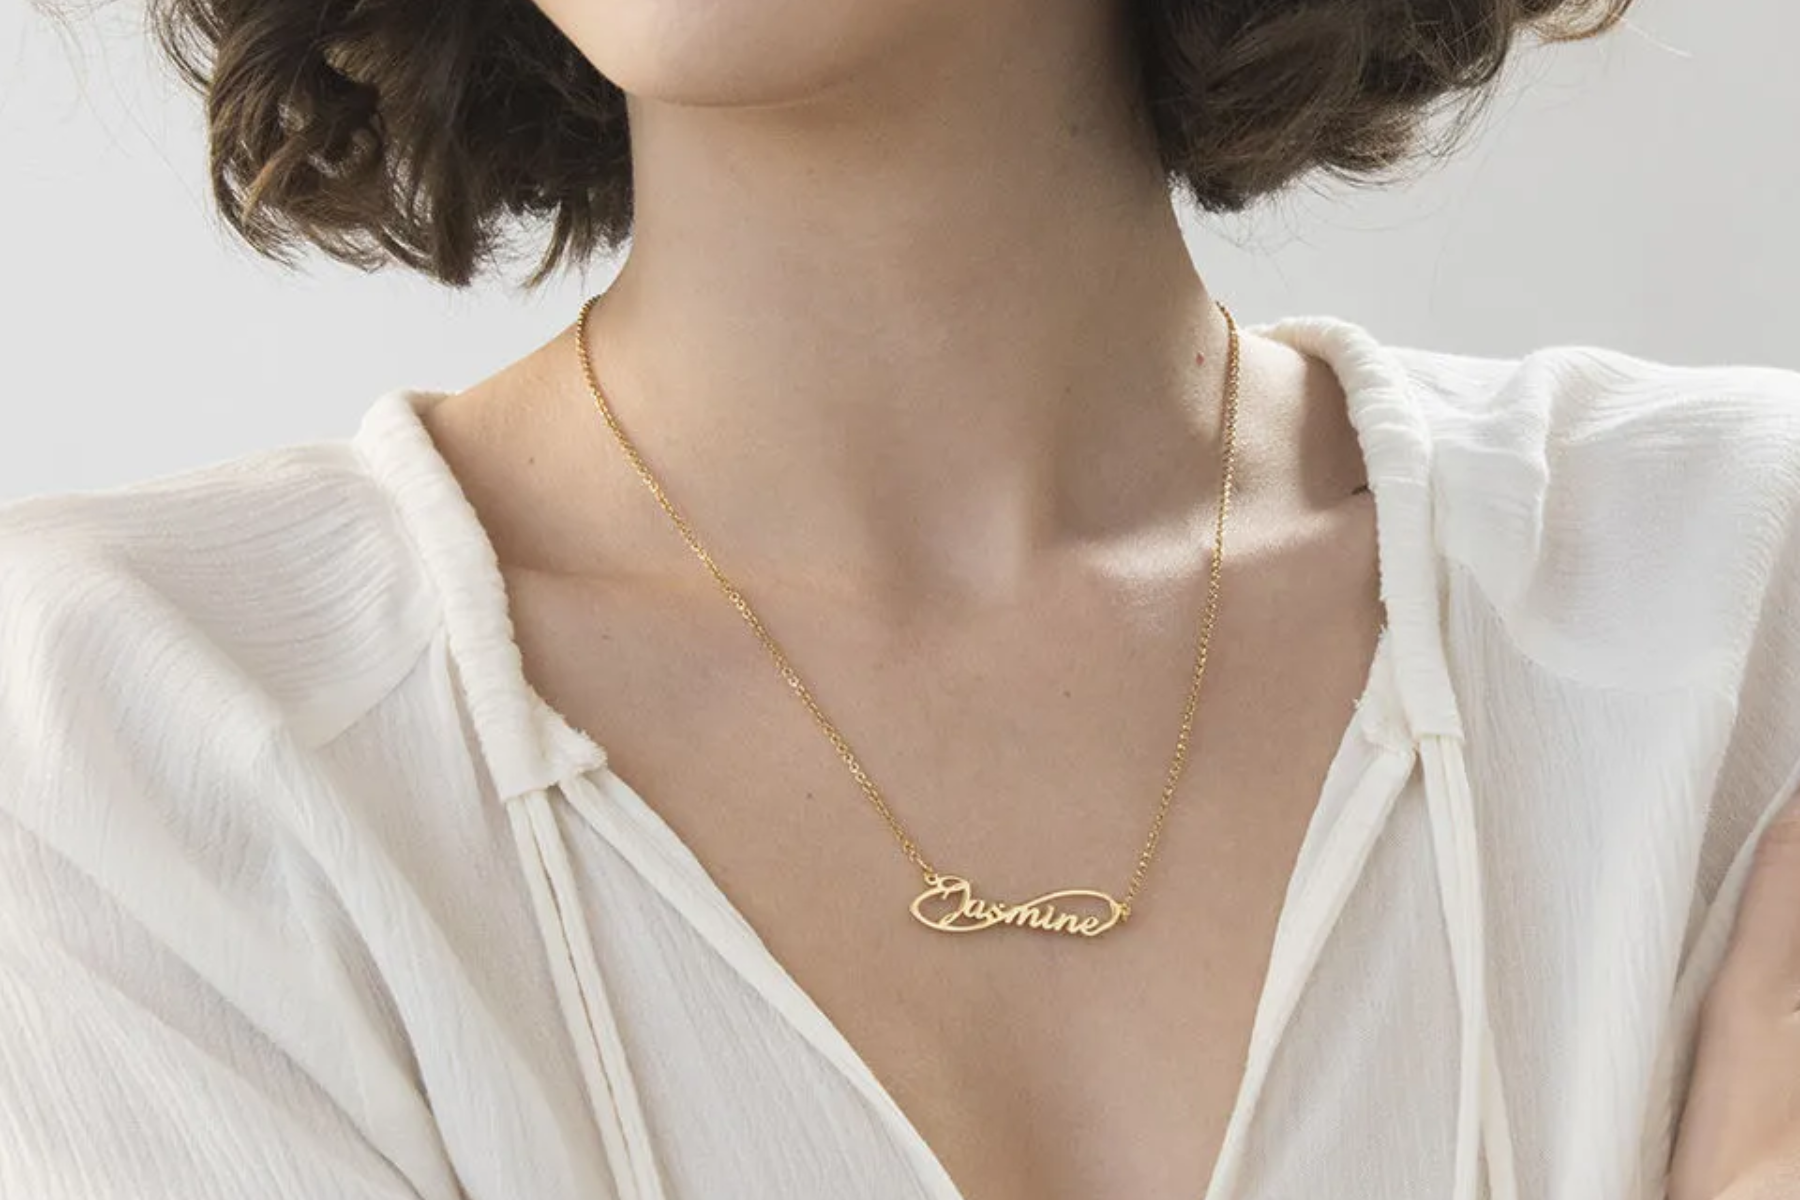 A woman wearing a gold endless pendant with her name engraved on it